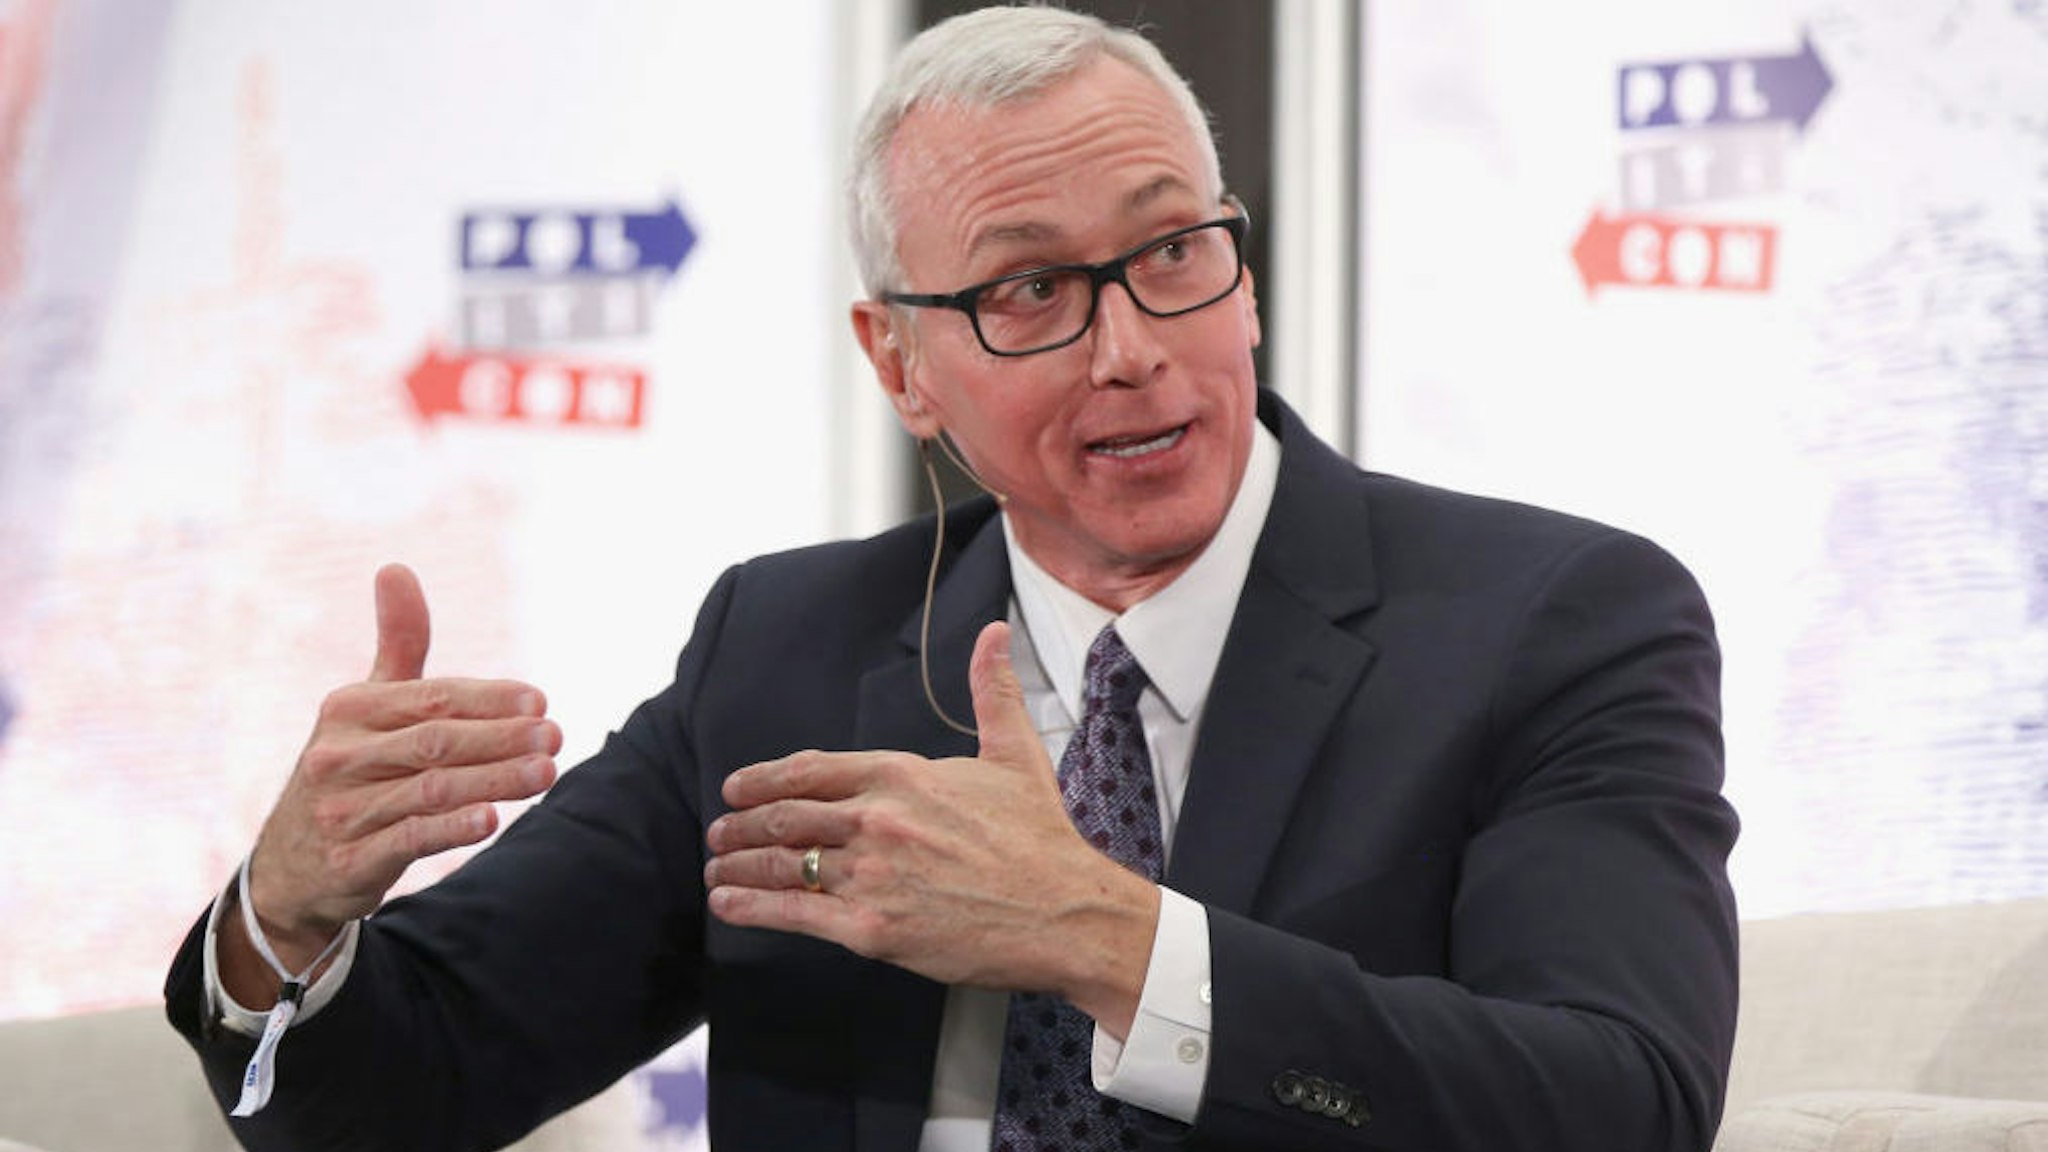 Dr. Drew speaks onstage during Politicon 2018 at Los Angeles Convention Center on October 20, 2018 in Los Angeles, California.